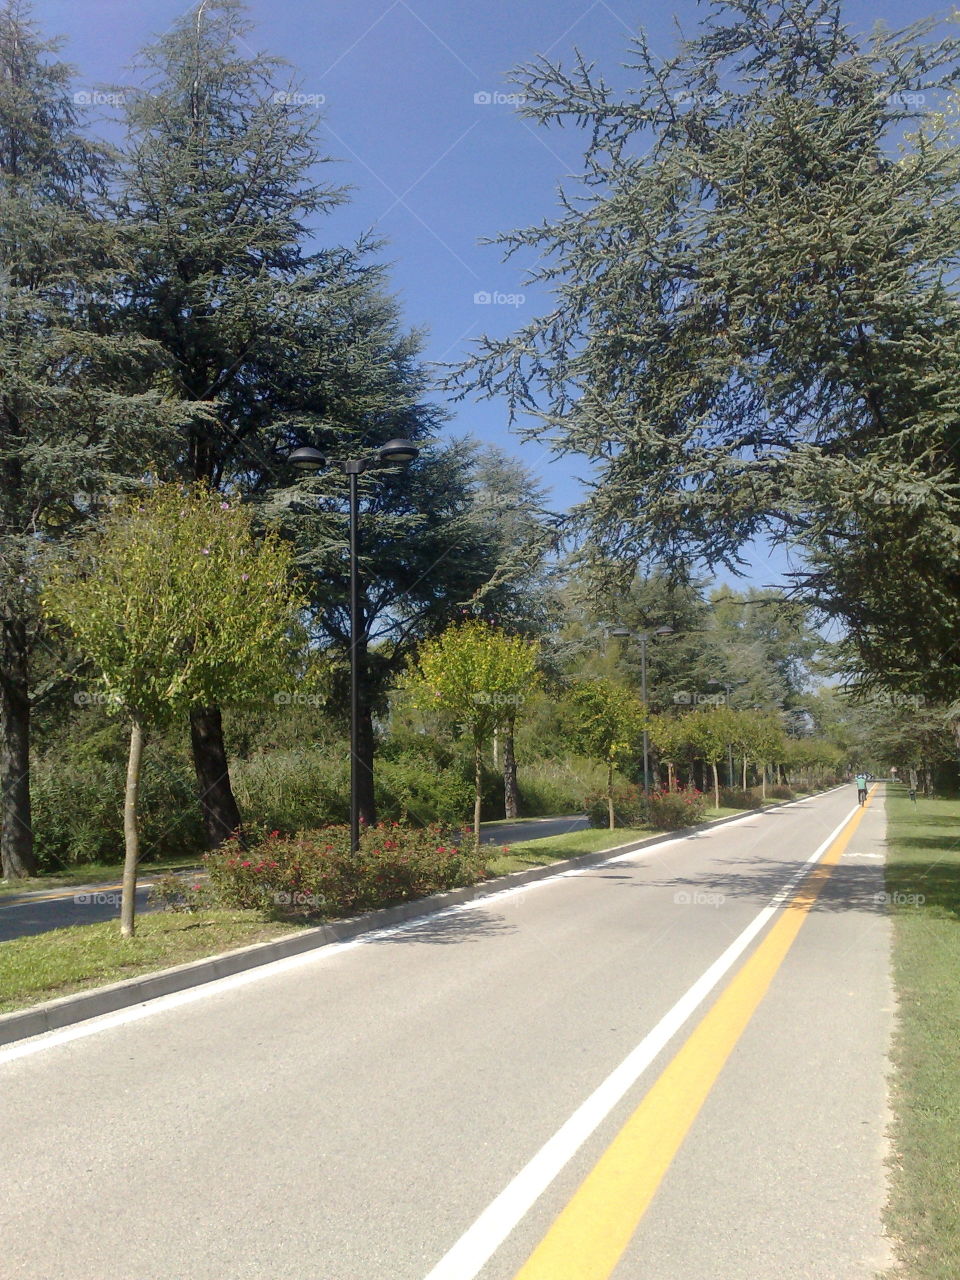 maritime environment, road to, trees and grass